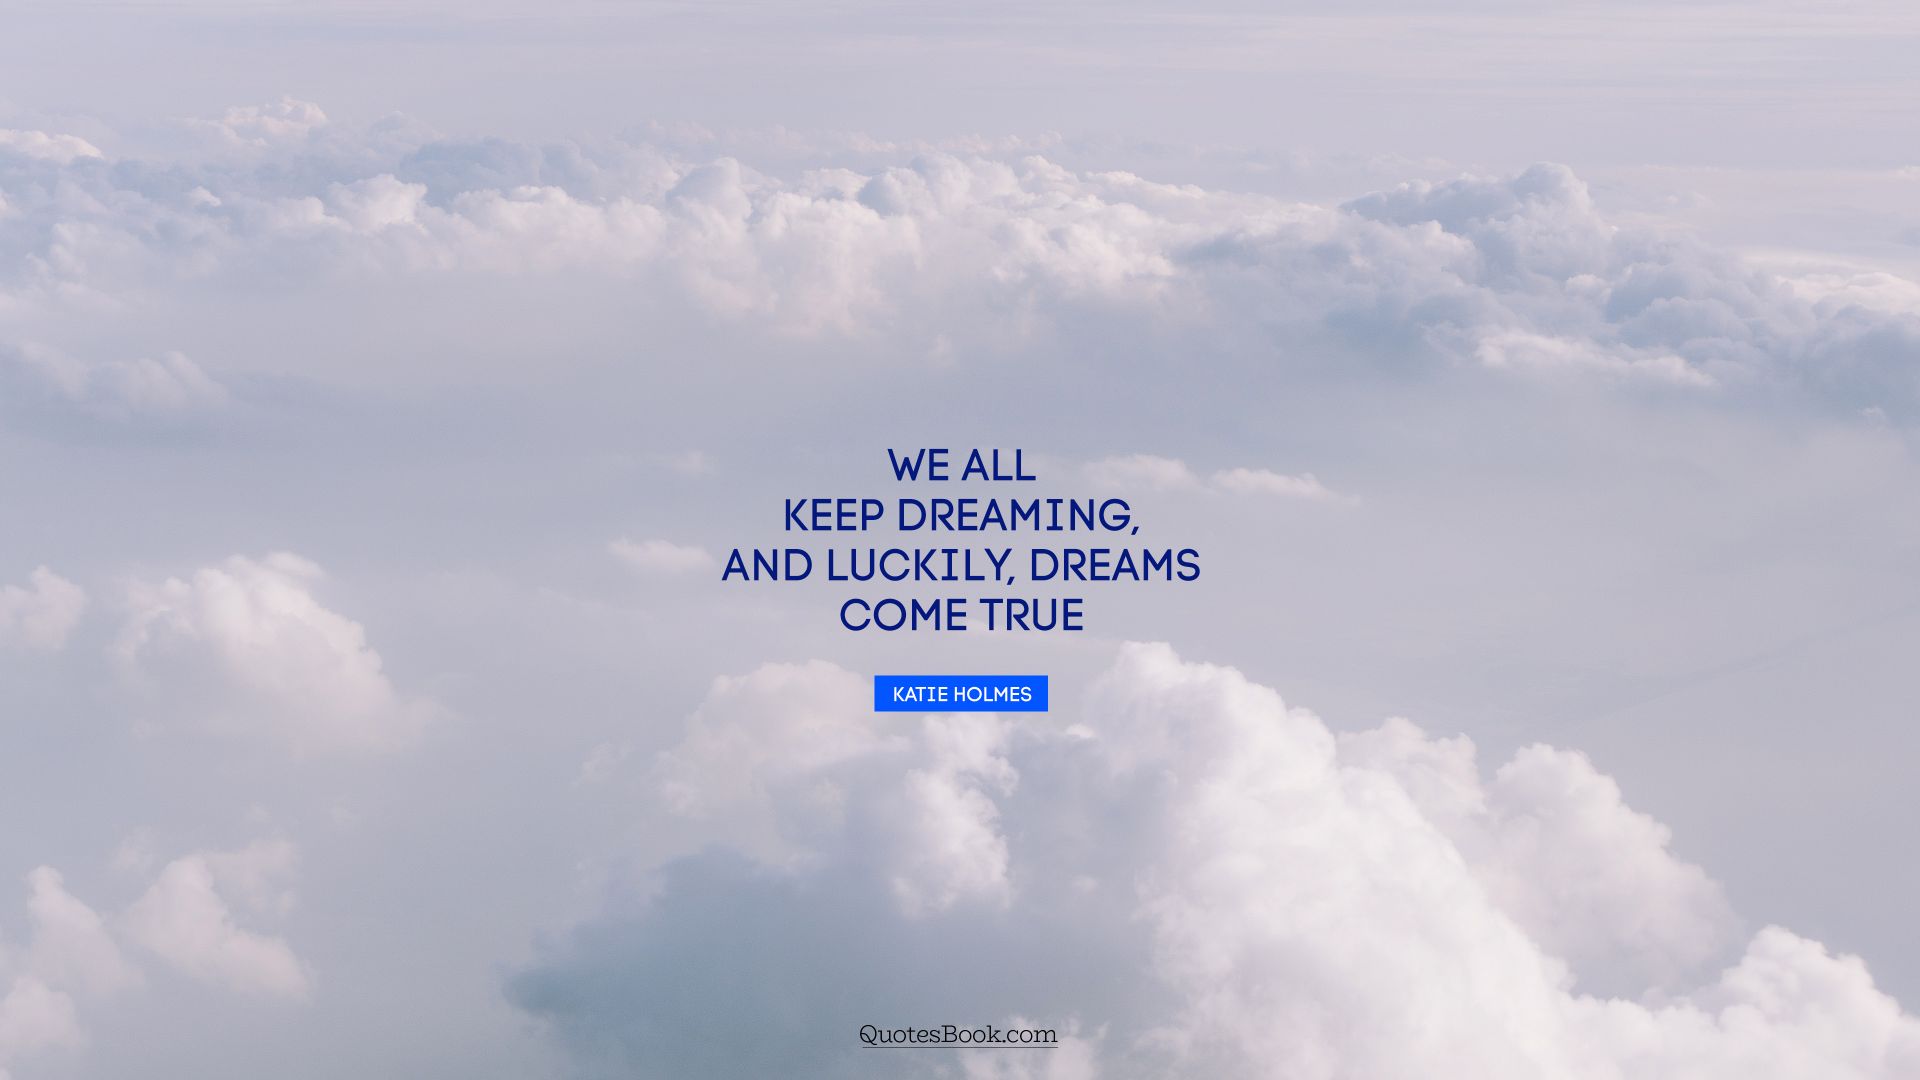 We all keep dreaming, and luckily, dreams come true. - Quote by Katie Holmes